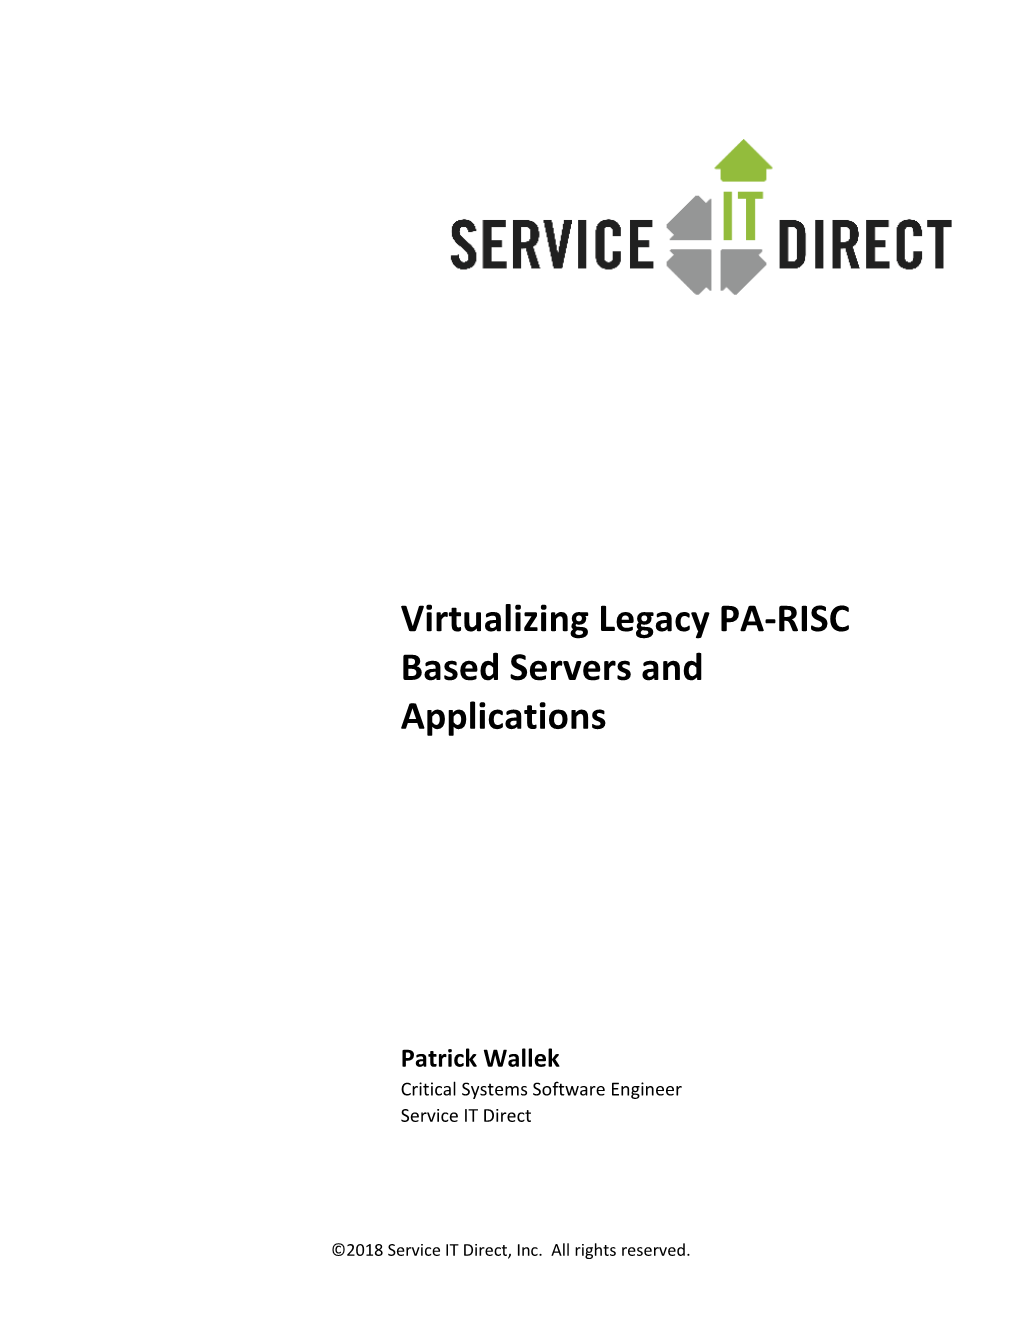 Virtualizing Legacy PA-RISC Based Servers and Applications